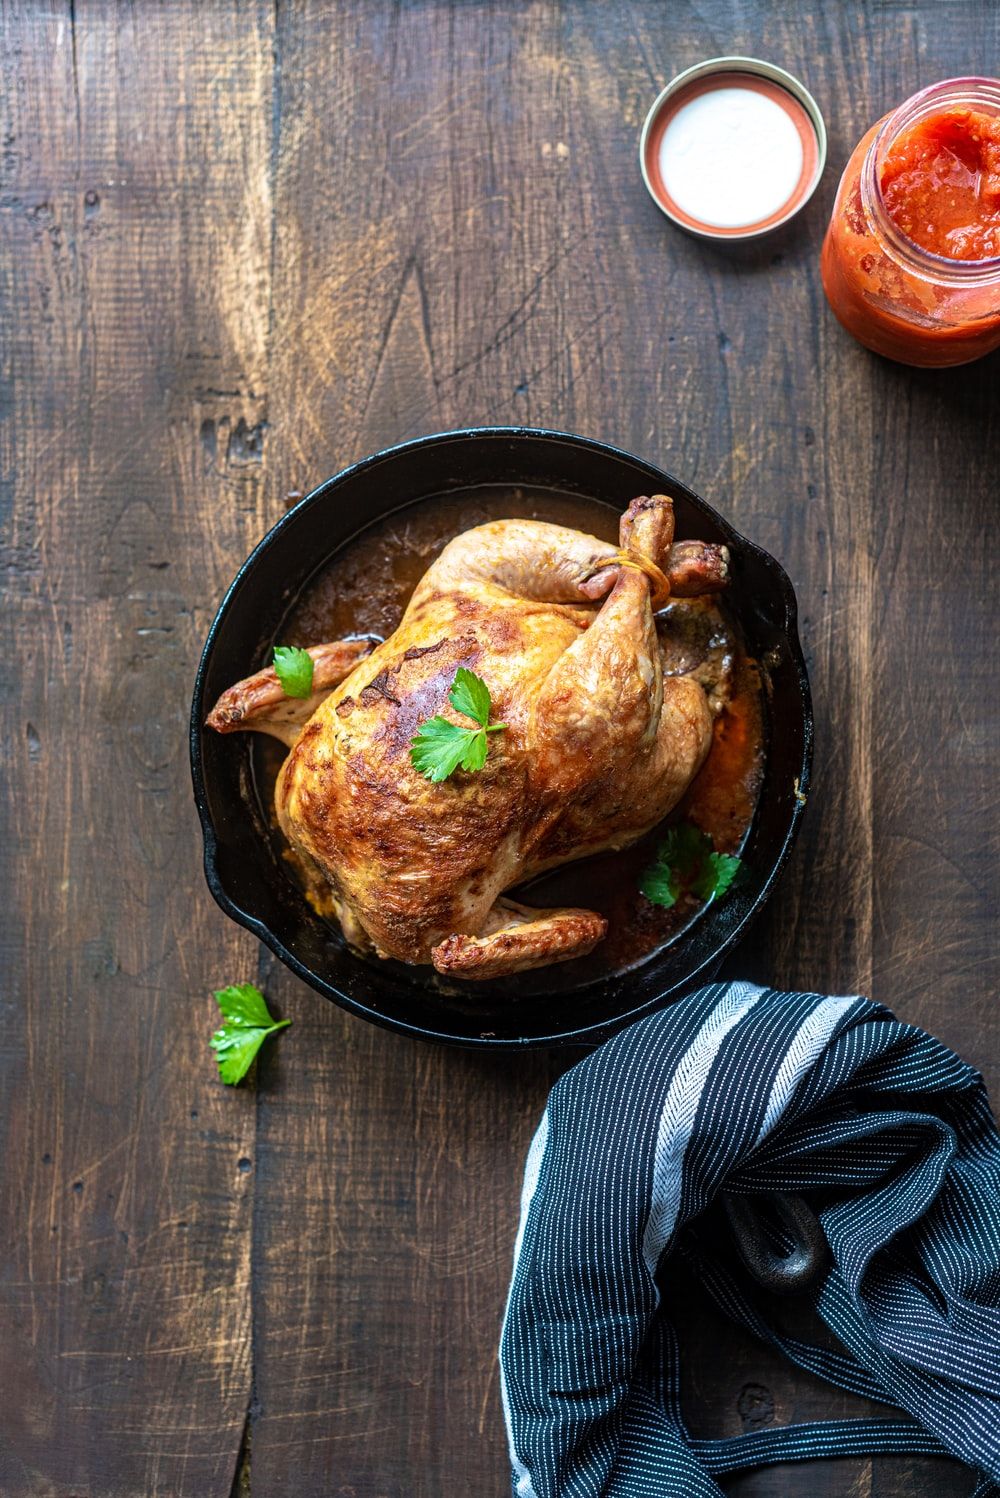 Roasted Chicken Picture. Download Free Image